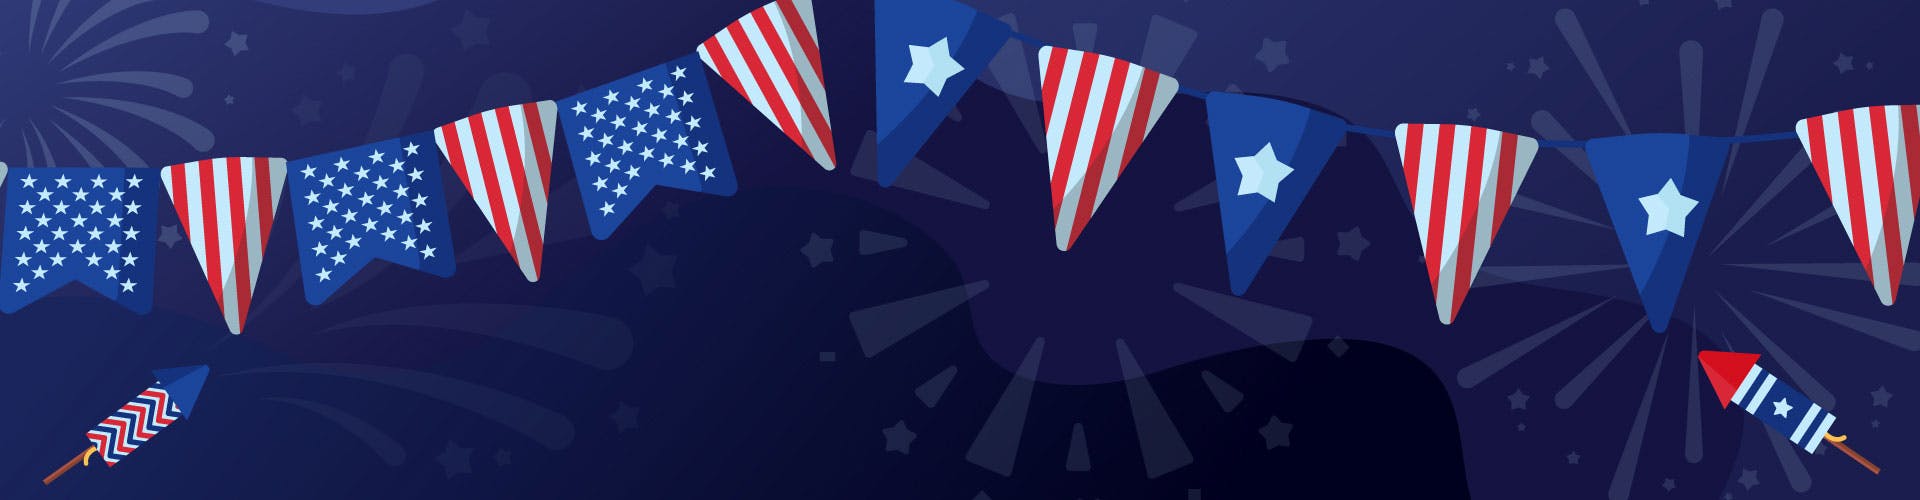 4th of July Pennants vector